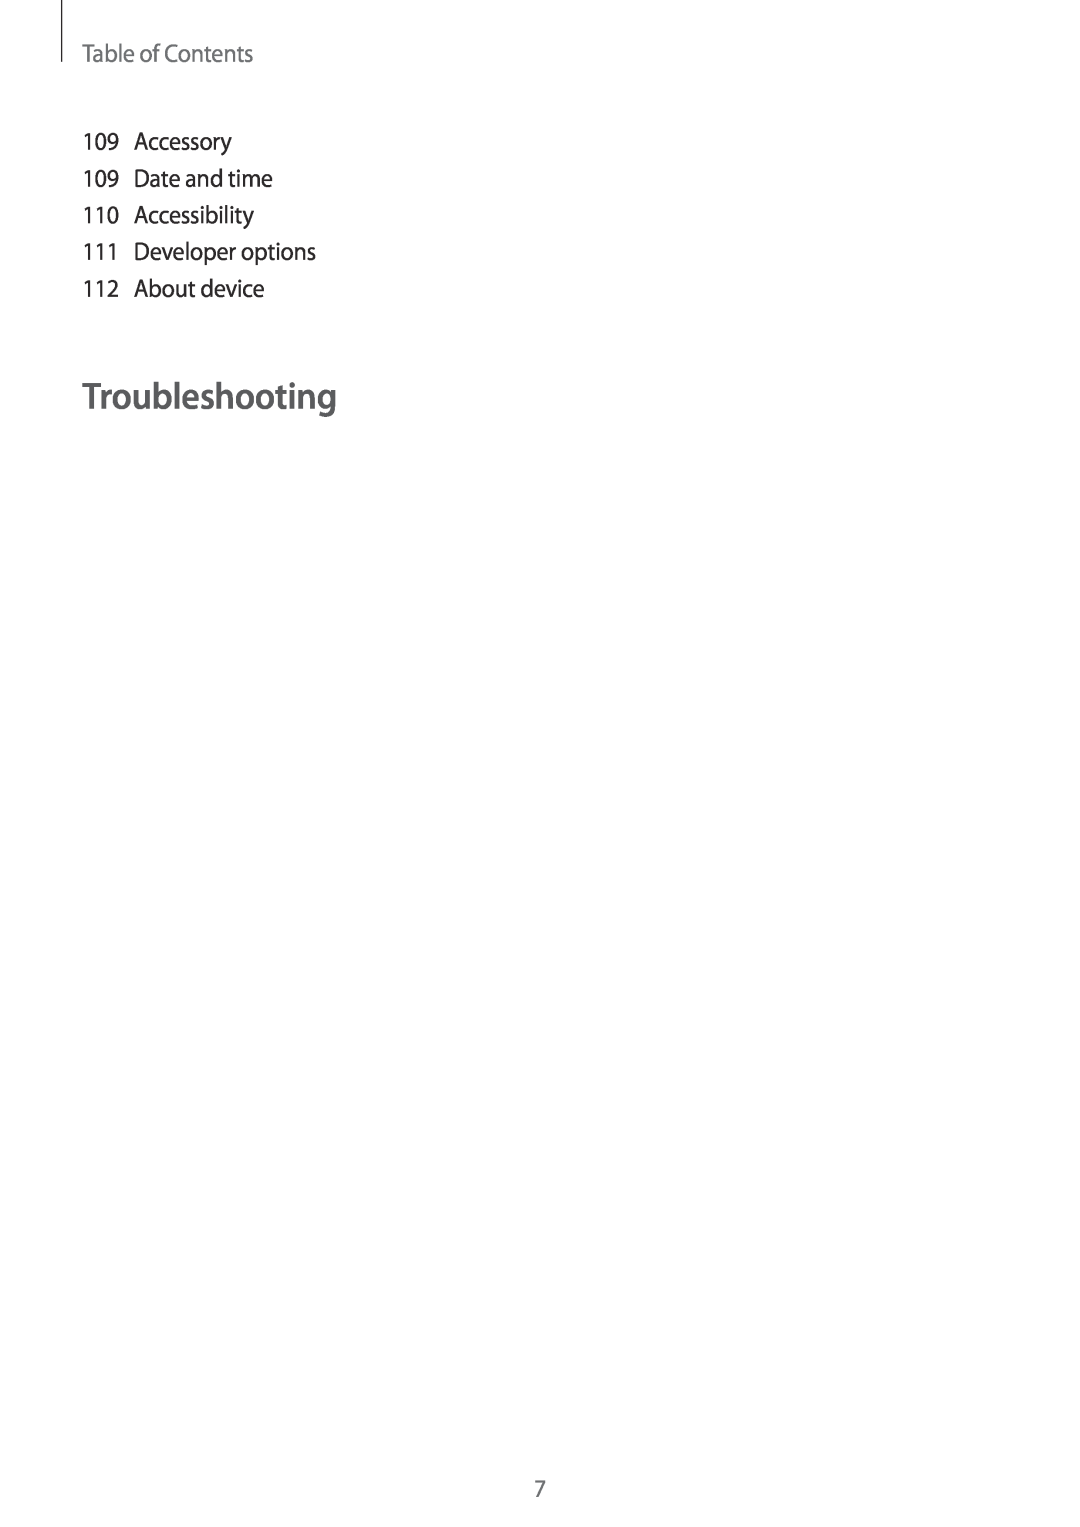 Samsung GT-I8190RWNVIA, GT-I8190RWNDTM Troubleshooting, Table of Contents, Accessory 109 Date and time 110 Accessibility 